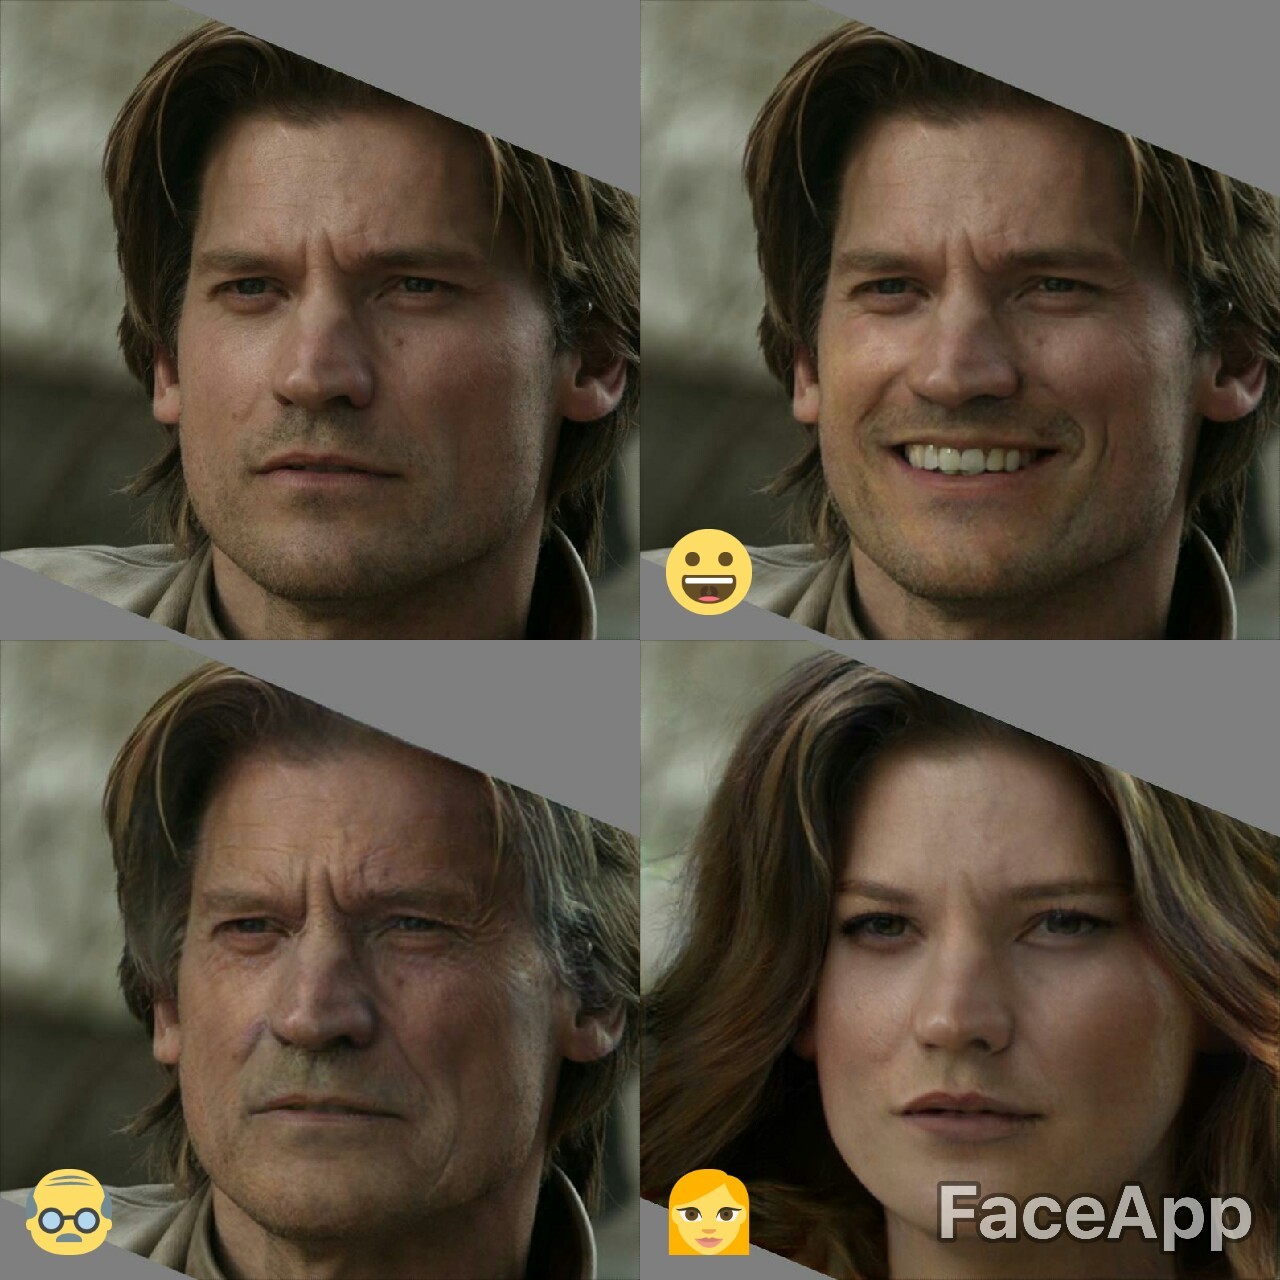 face app. Game of Thrones - Longpost, Characters (edit), Collage, Faceapp, Game of Thrones, My